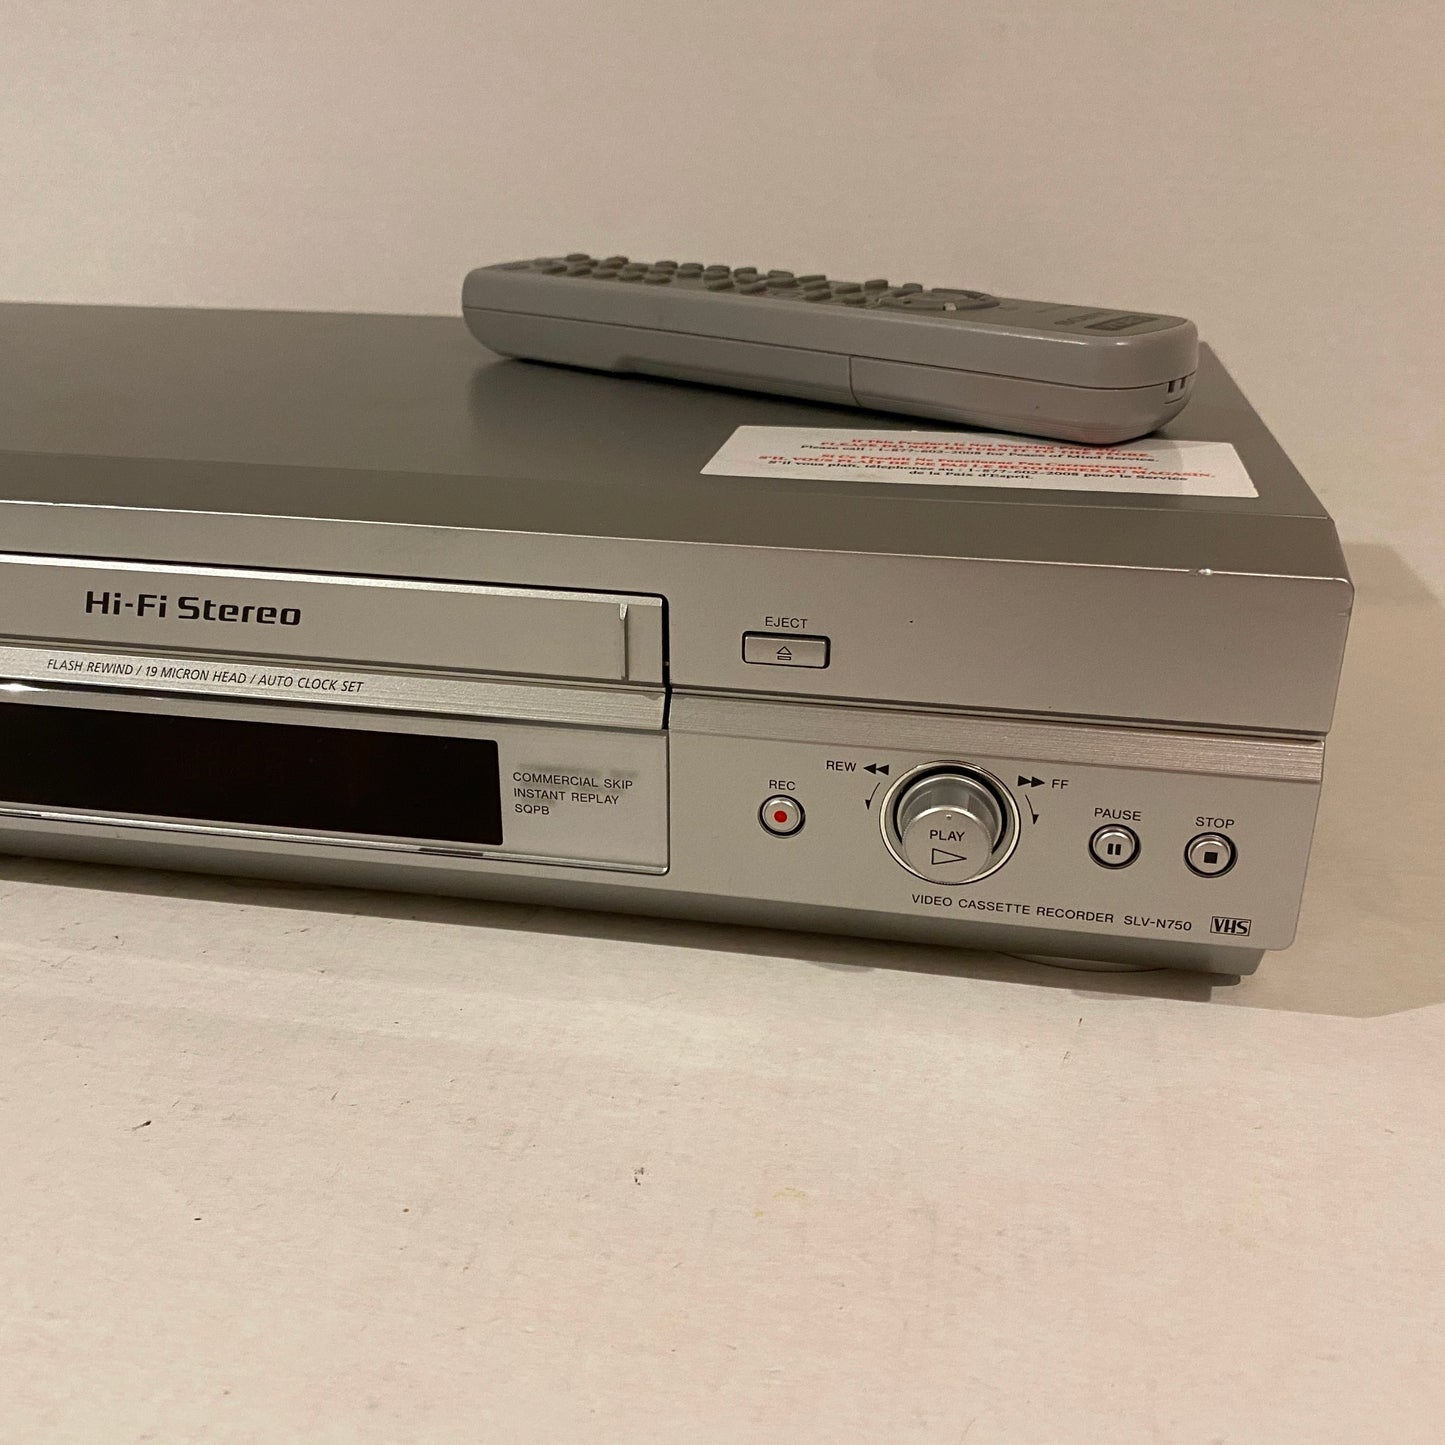 Sony 4 Head Hi-Fi VCR VHS Player Recorder with Remote - SLV-N750